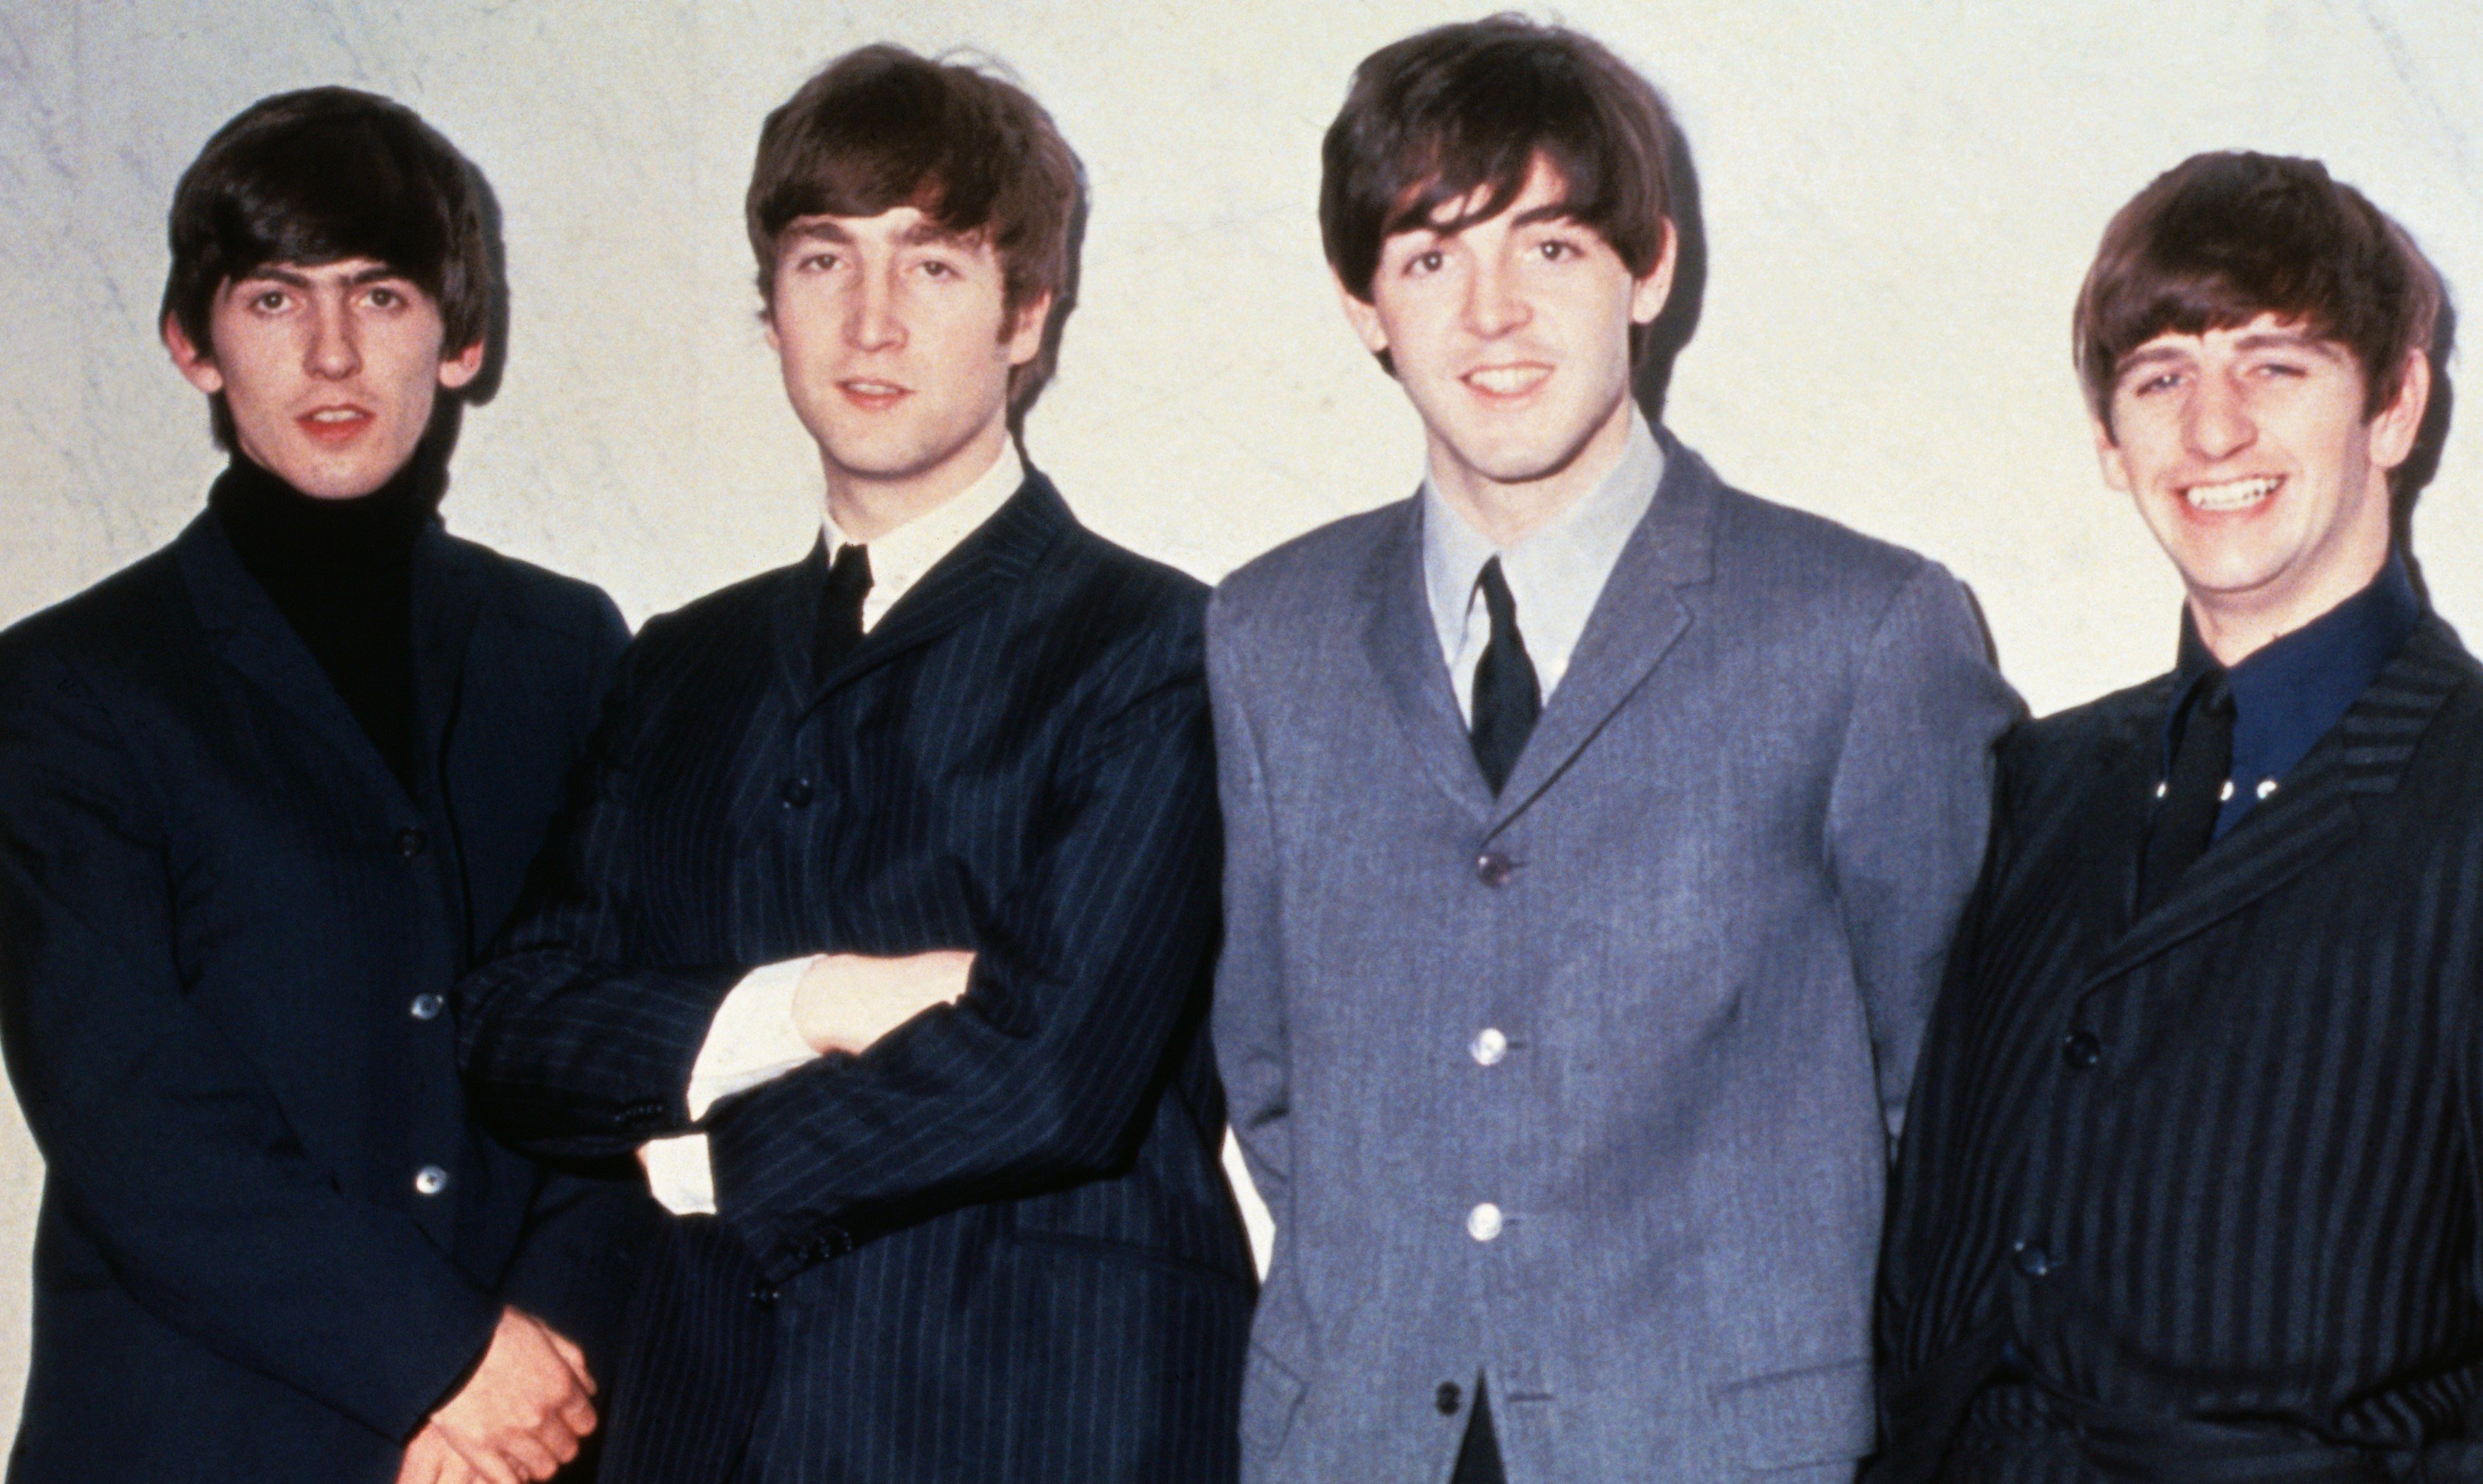 The Beatles in suits